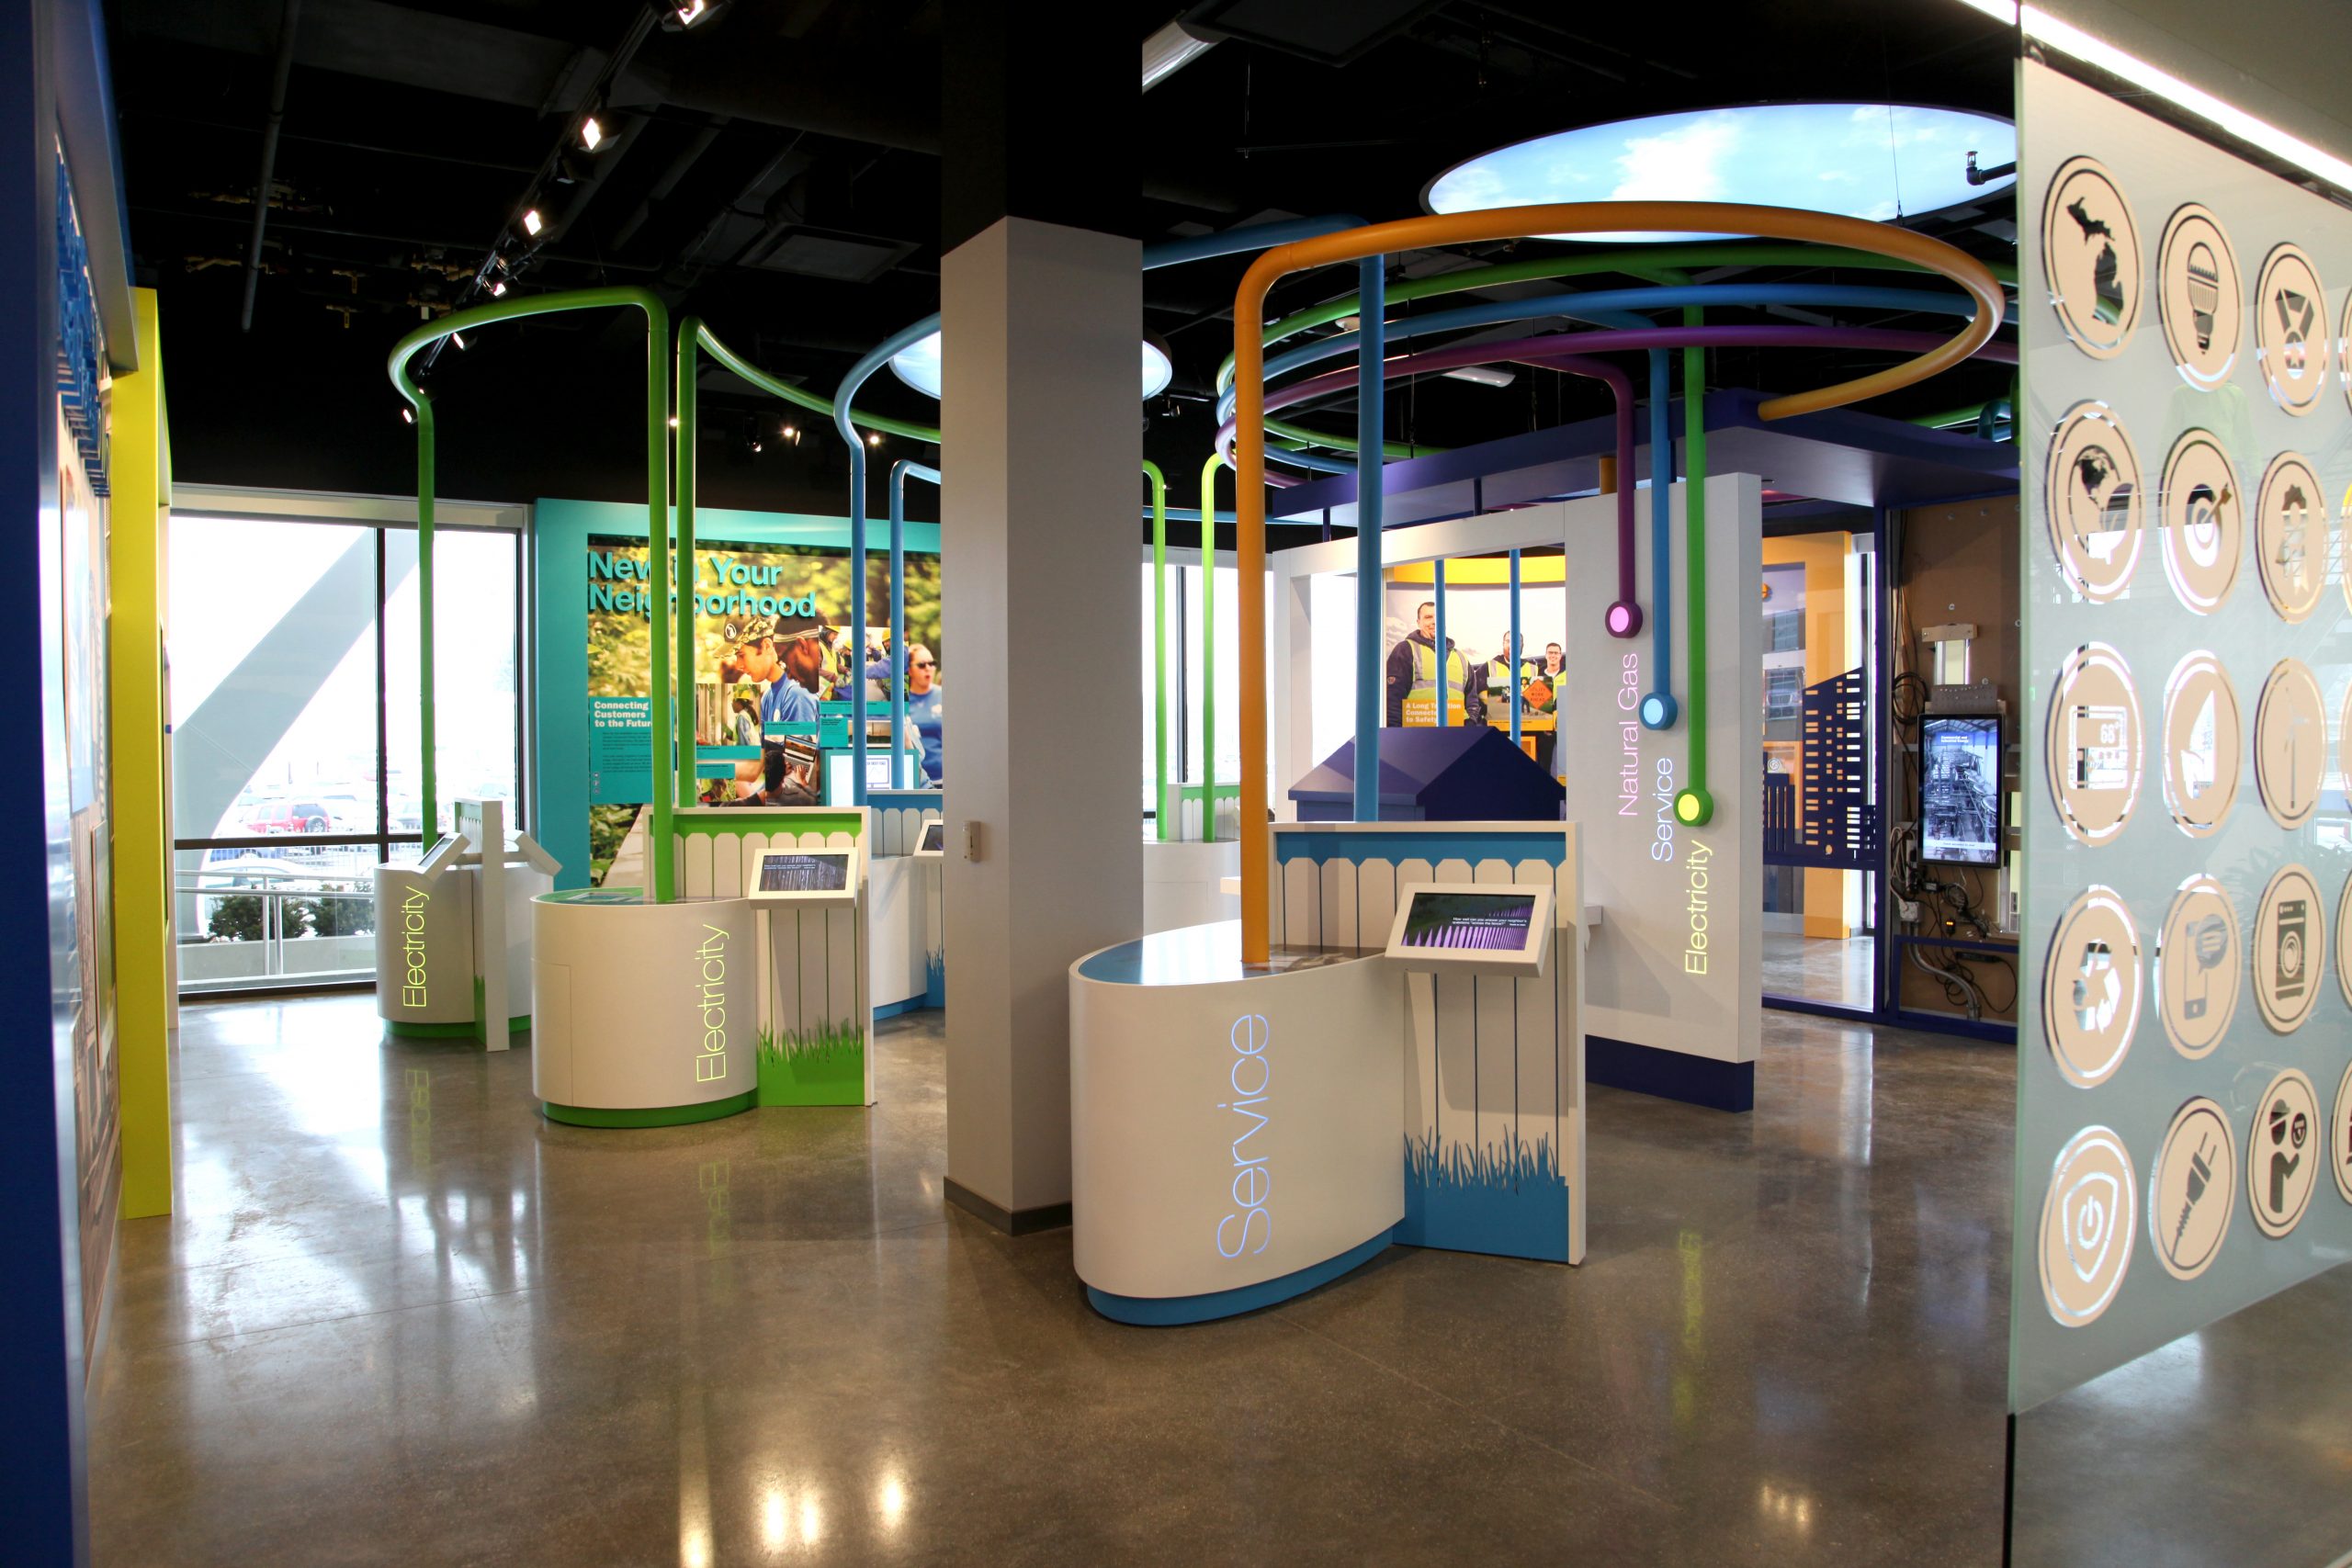 Exhibit stations with illuminated text highlighting Natural Gas, Energy and Services